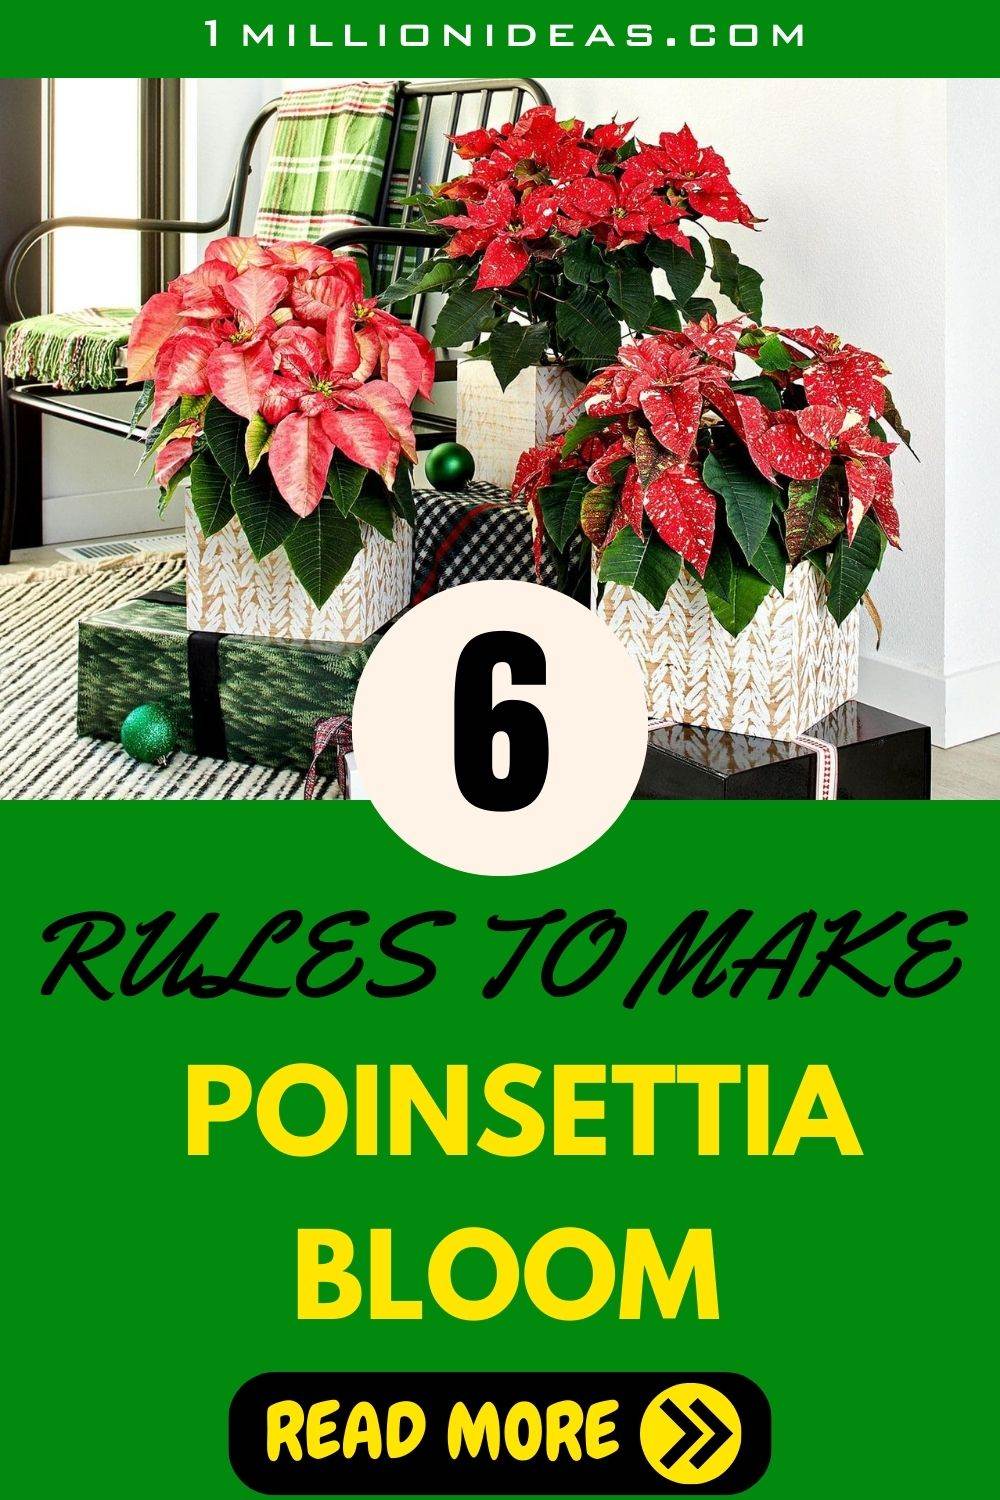 6 Golden Rules To Make Poinsettia Bloom In Time During Christmas And Beyond - 35